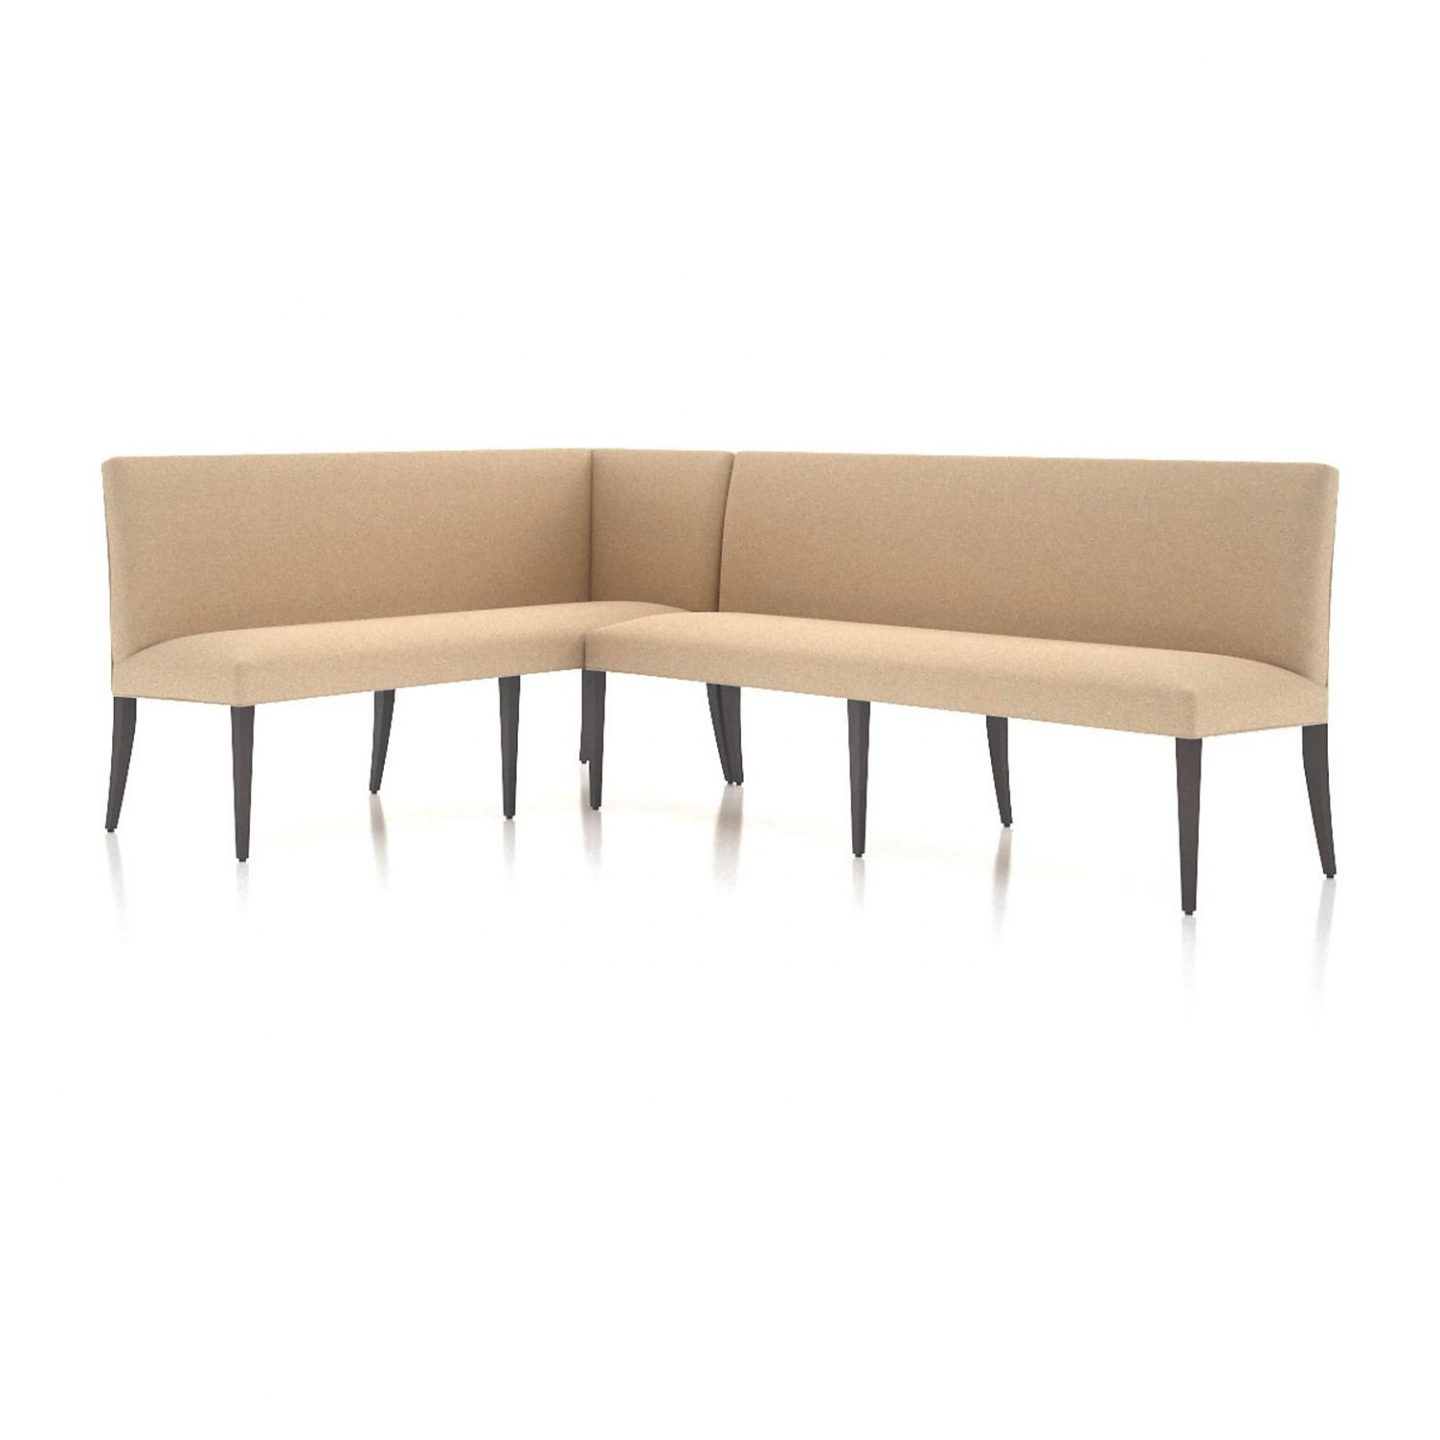 Crate & Barrell banquette seating 